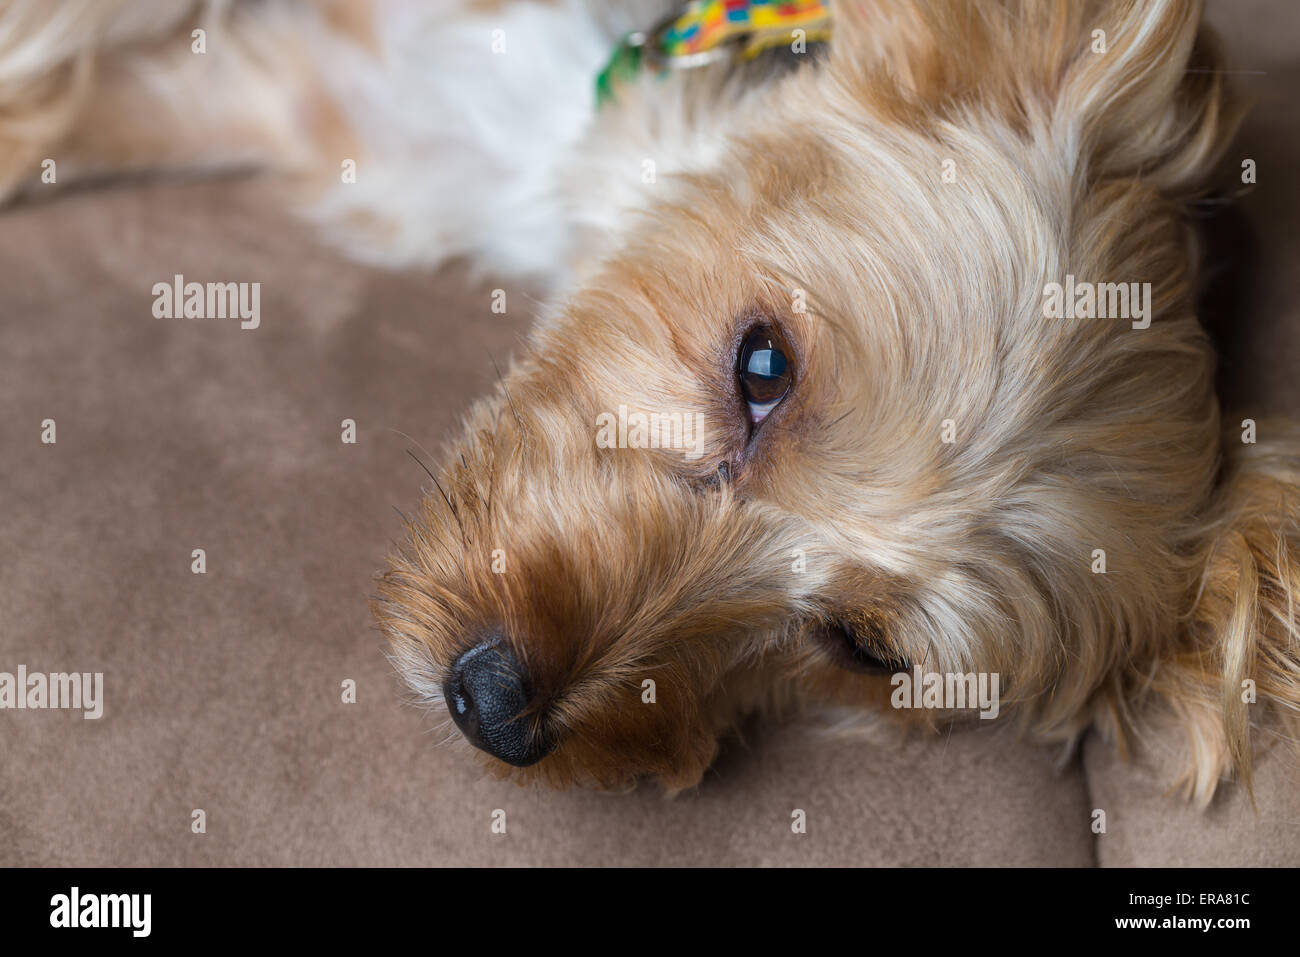 A cute yorkshire terrier laying on a couch wearing a collar. Stock Photo